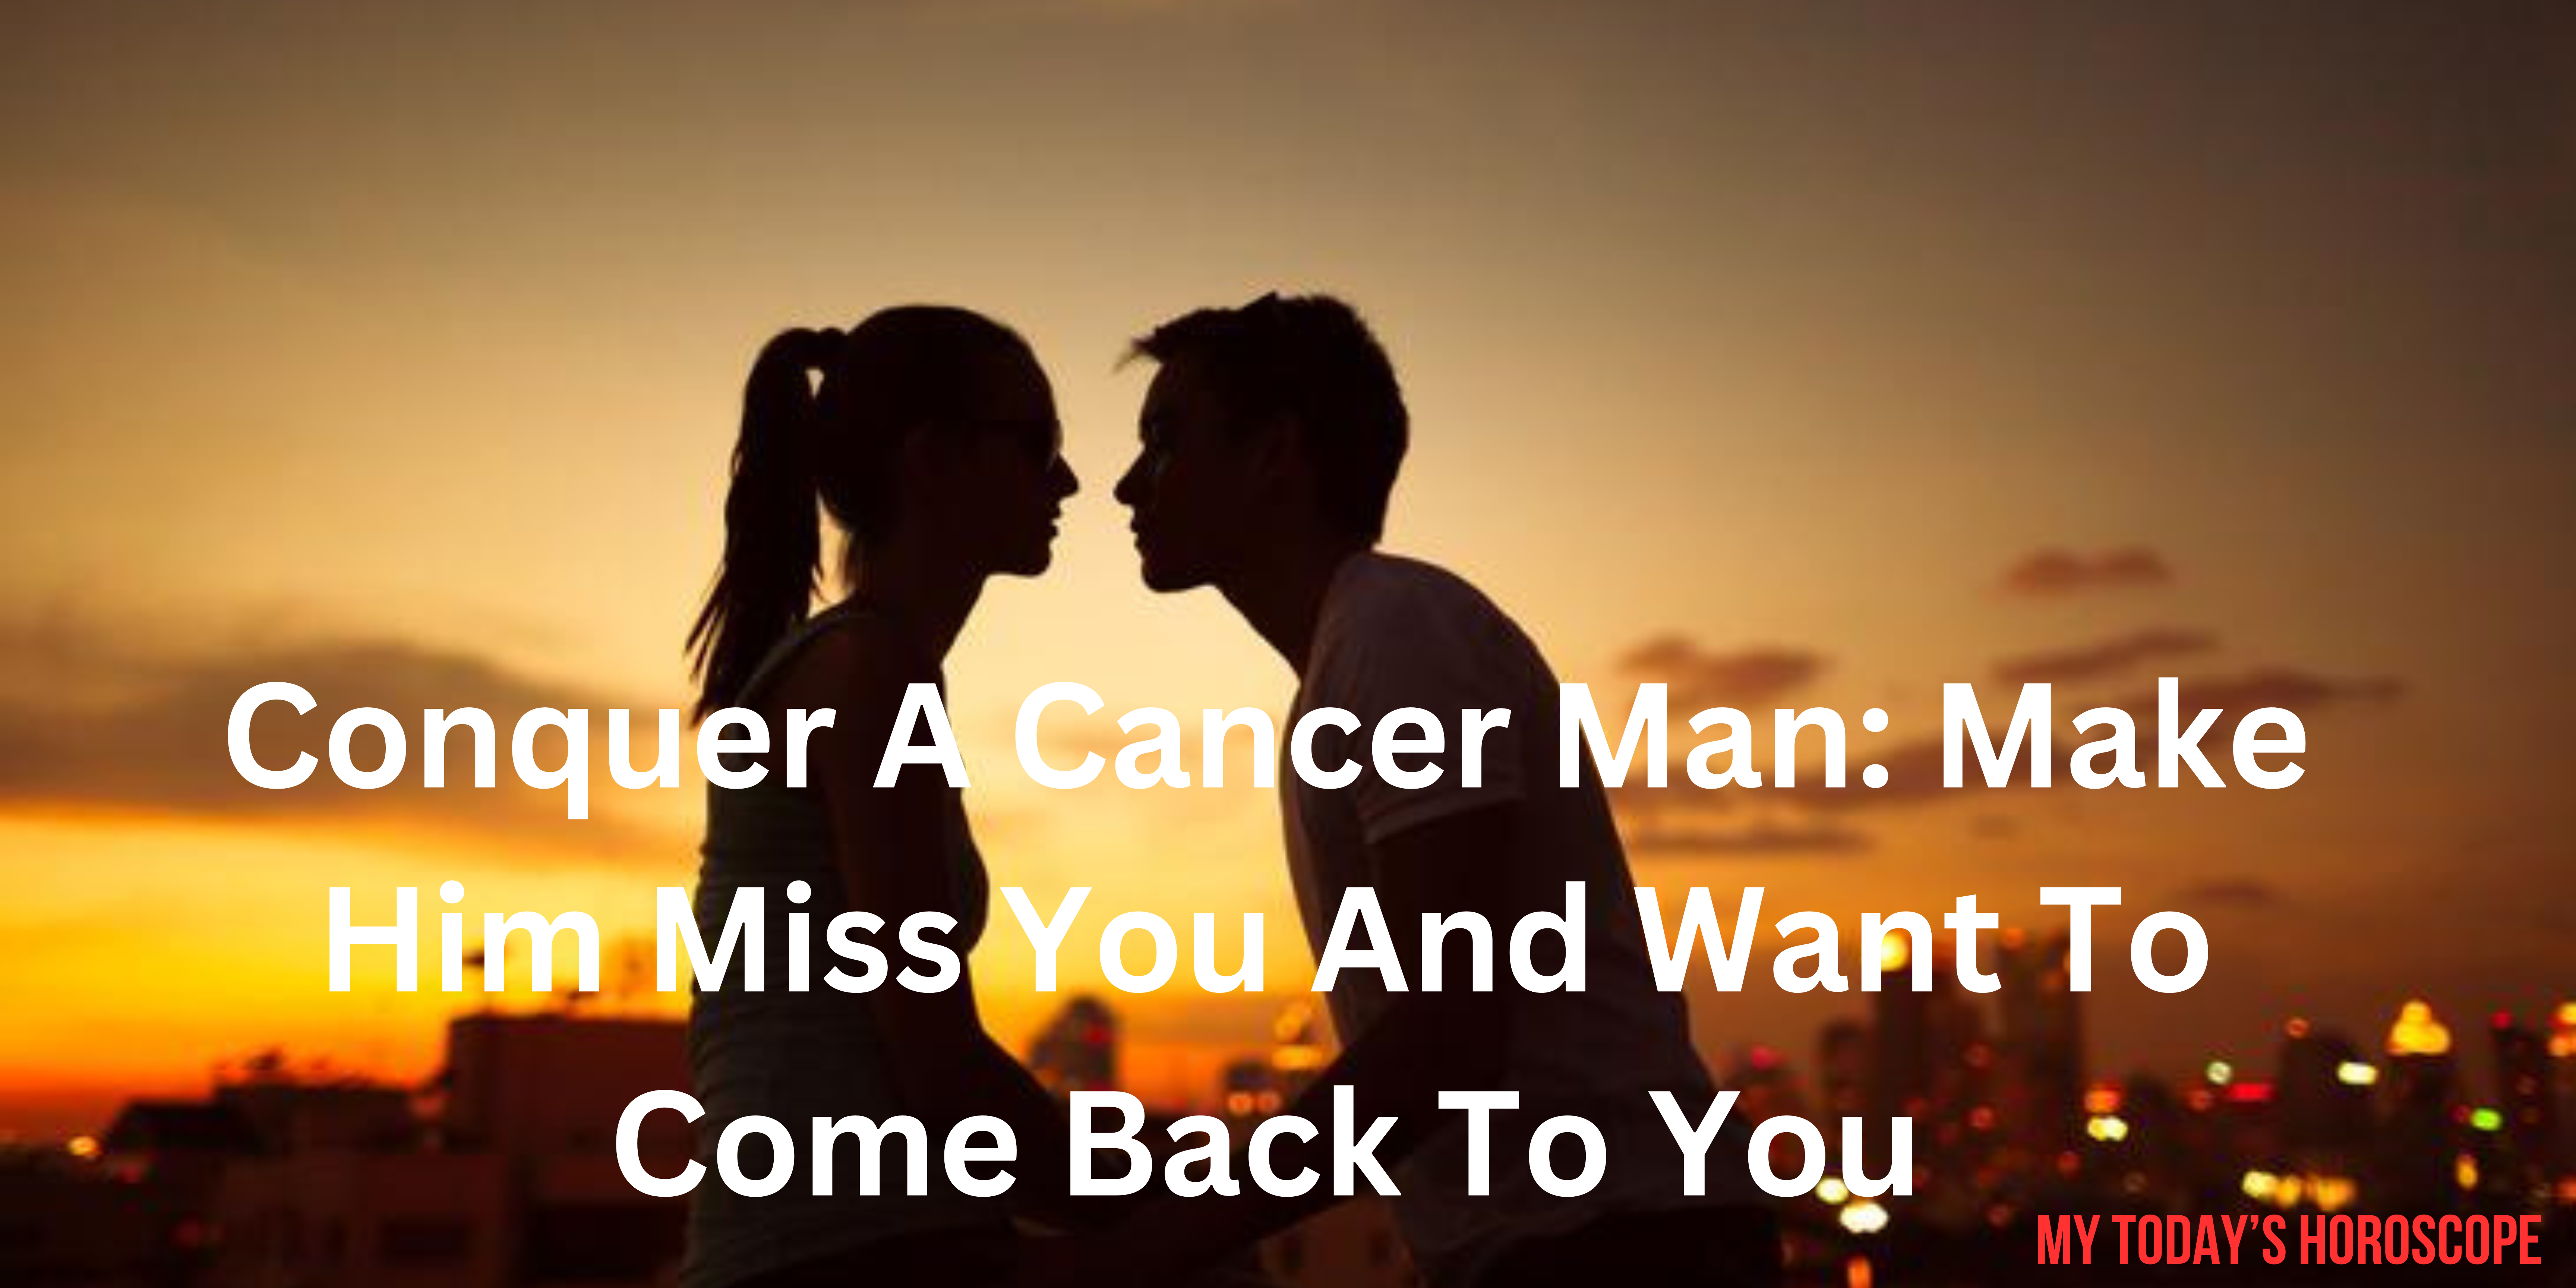 10+ WAYS TO CONQUER A CANCER MAN